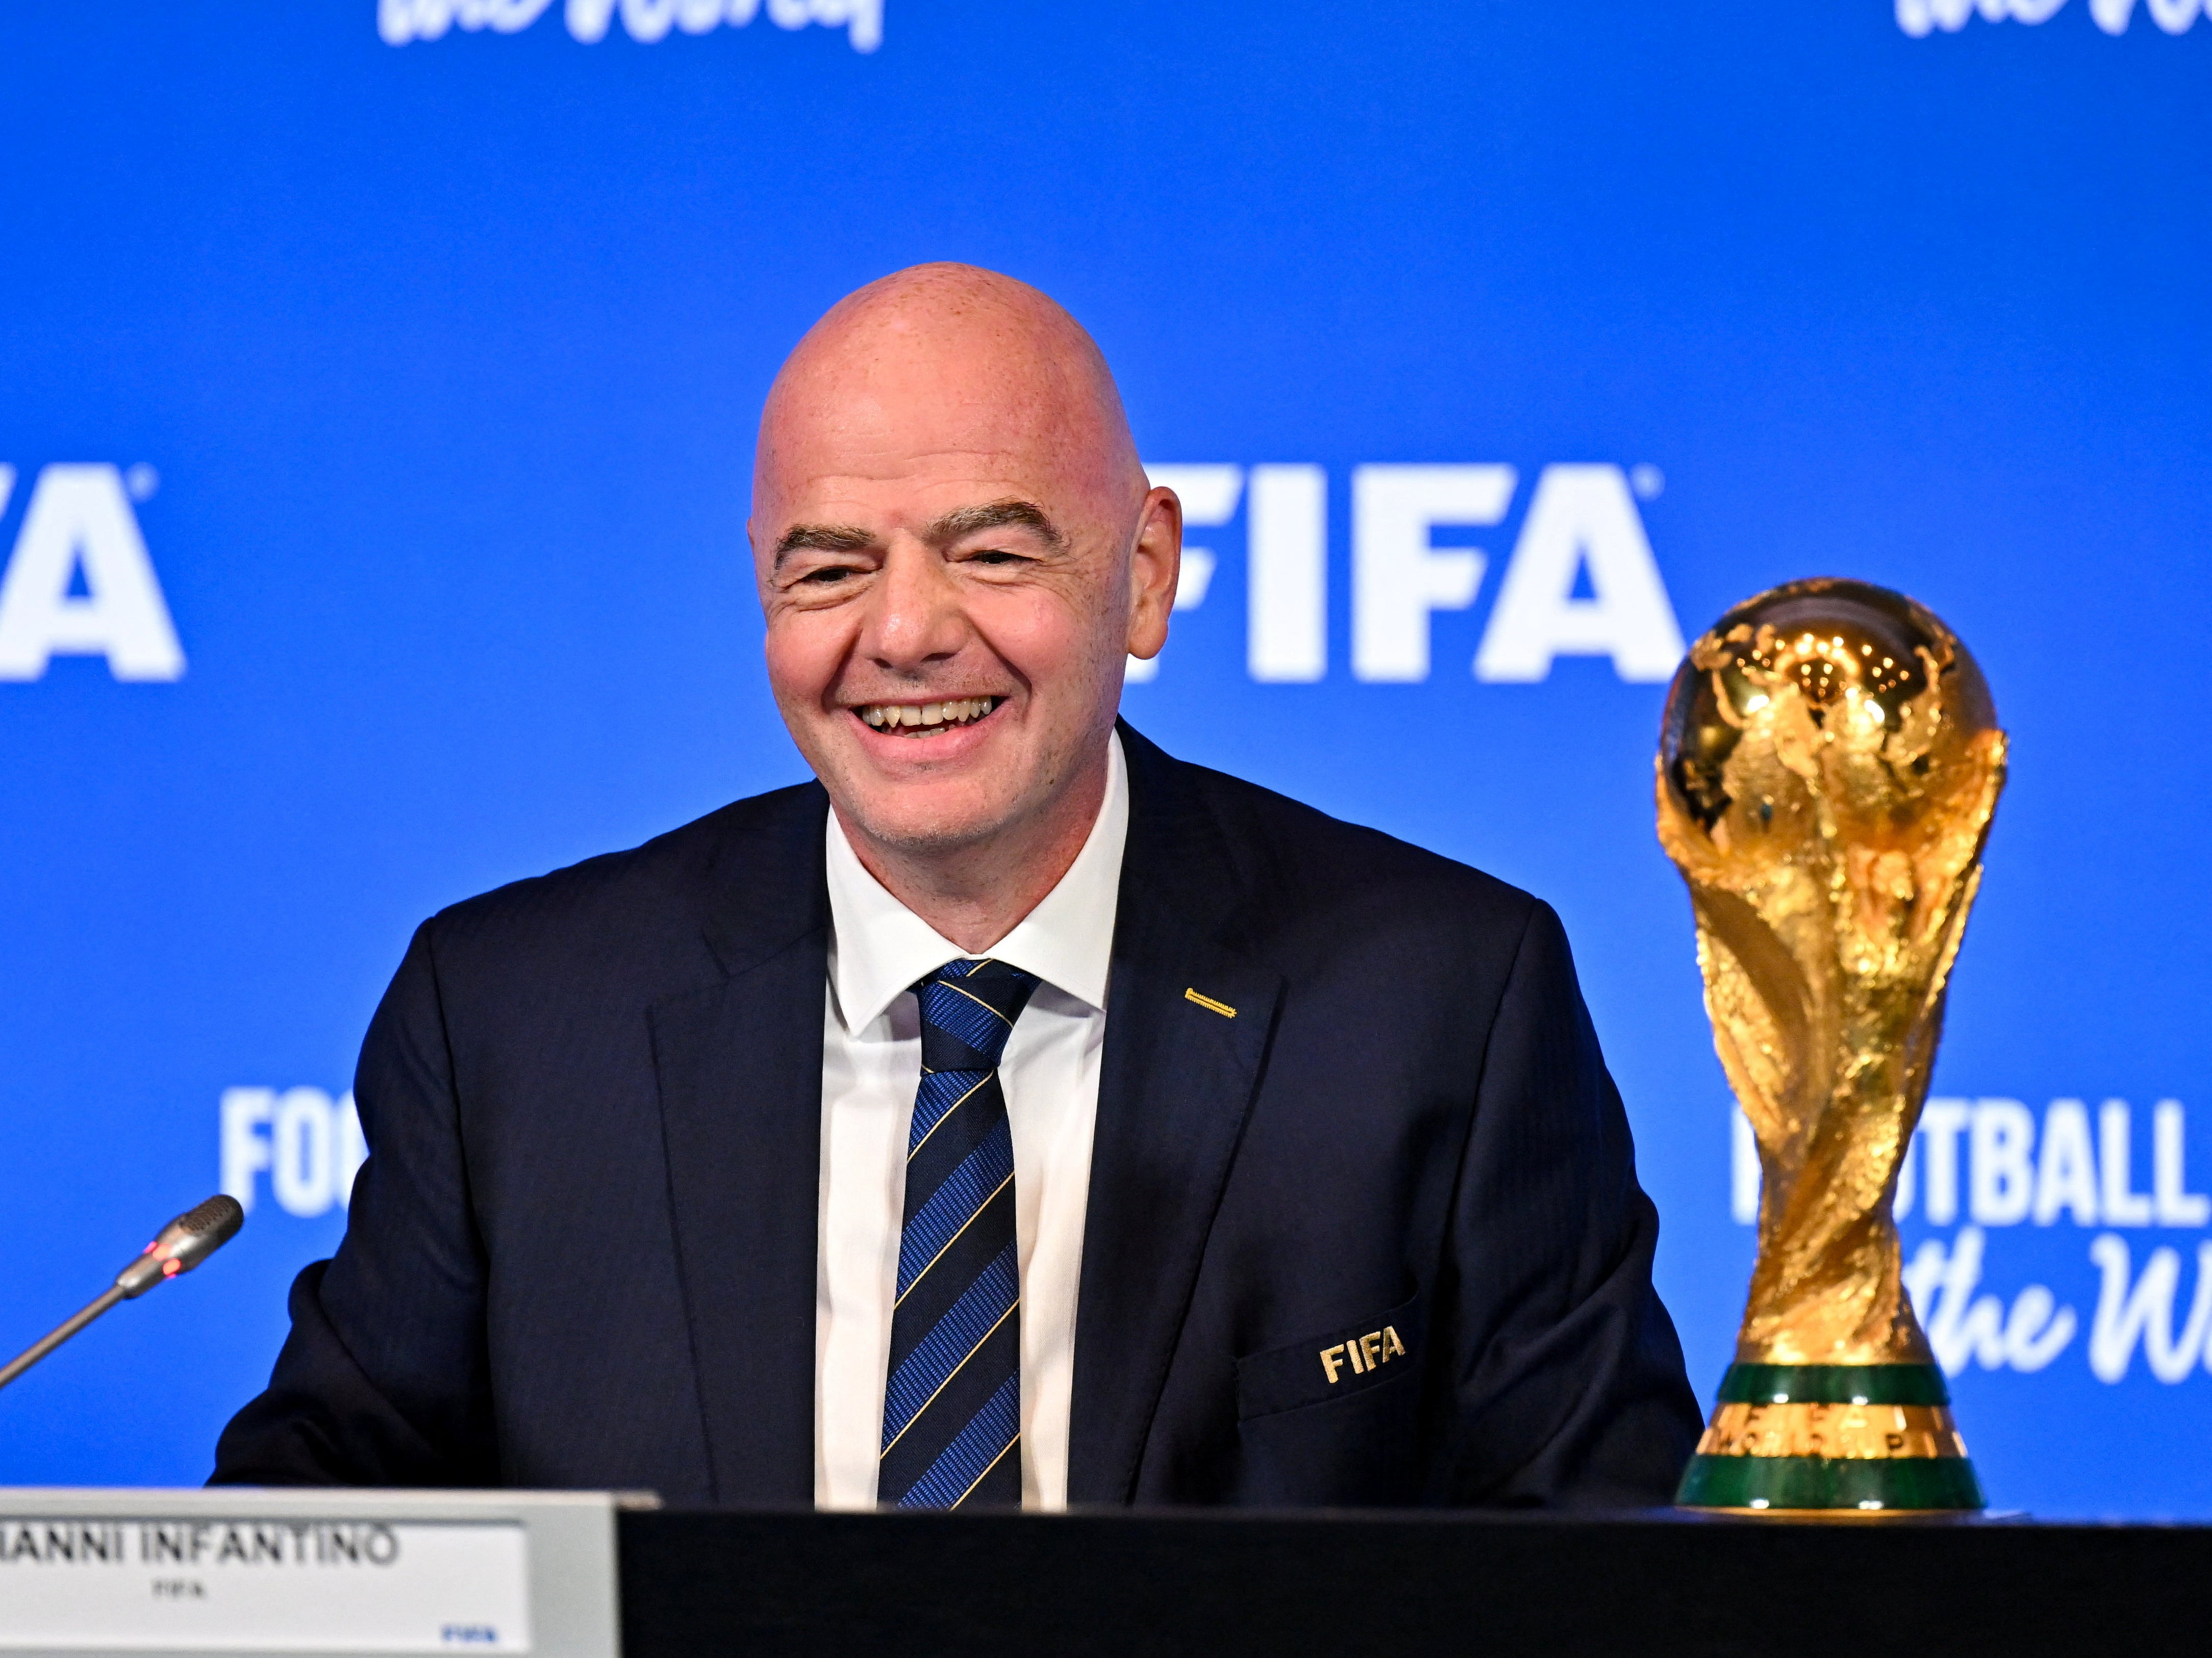 Fifa President Gianni Infantino during the Virtual Council Meeting